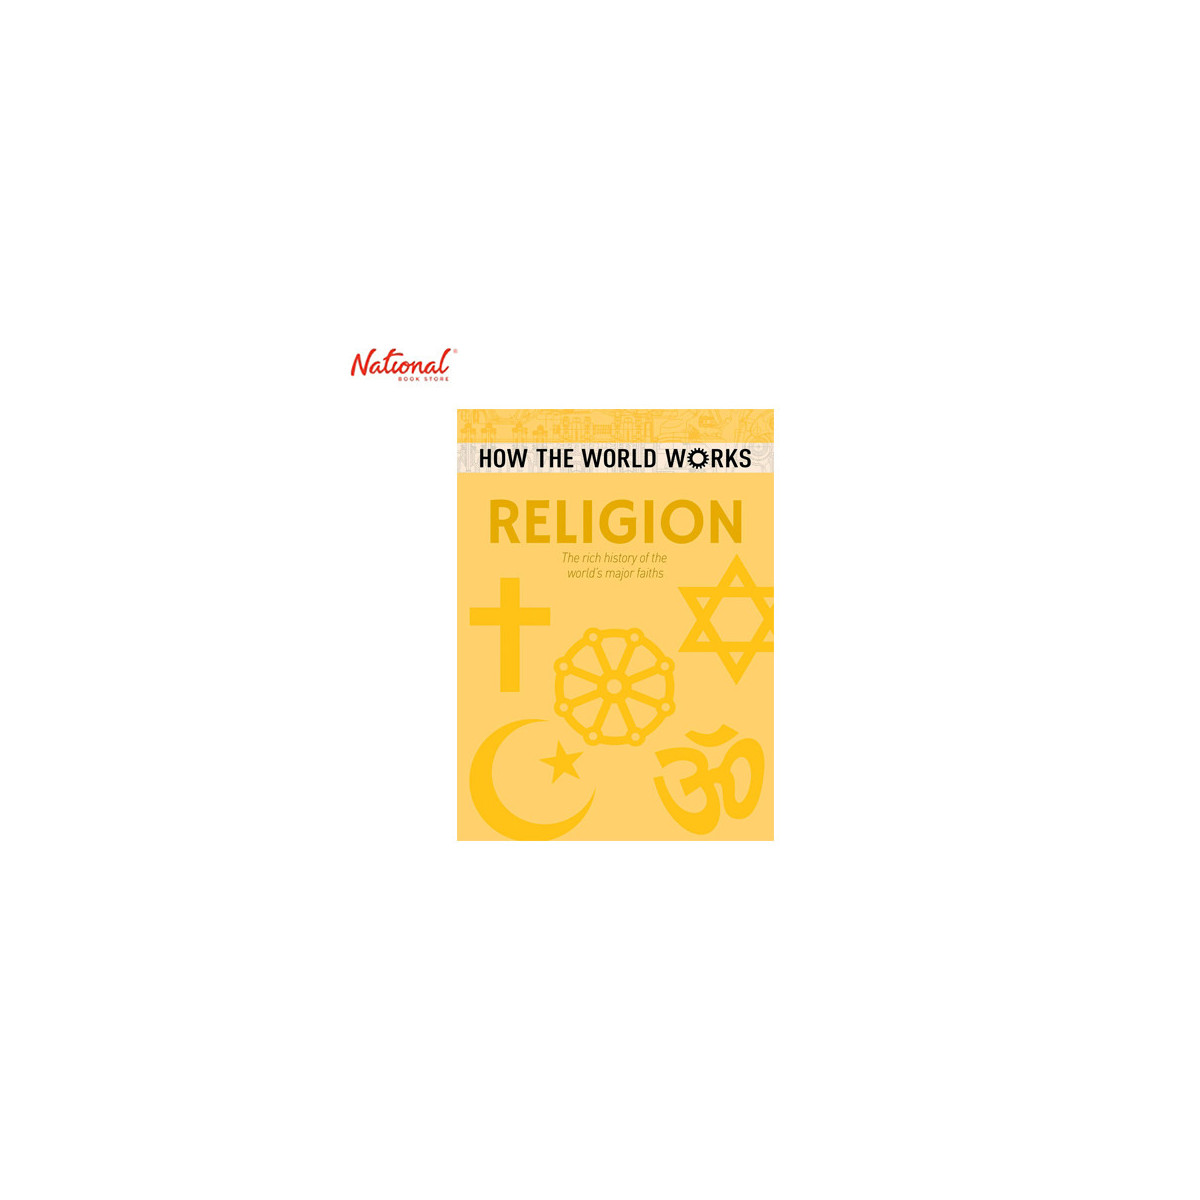 How The World Works: Religion Trade Paperback by Anne Rooney